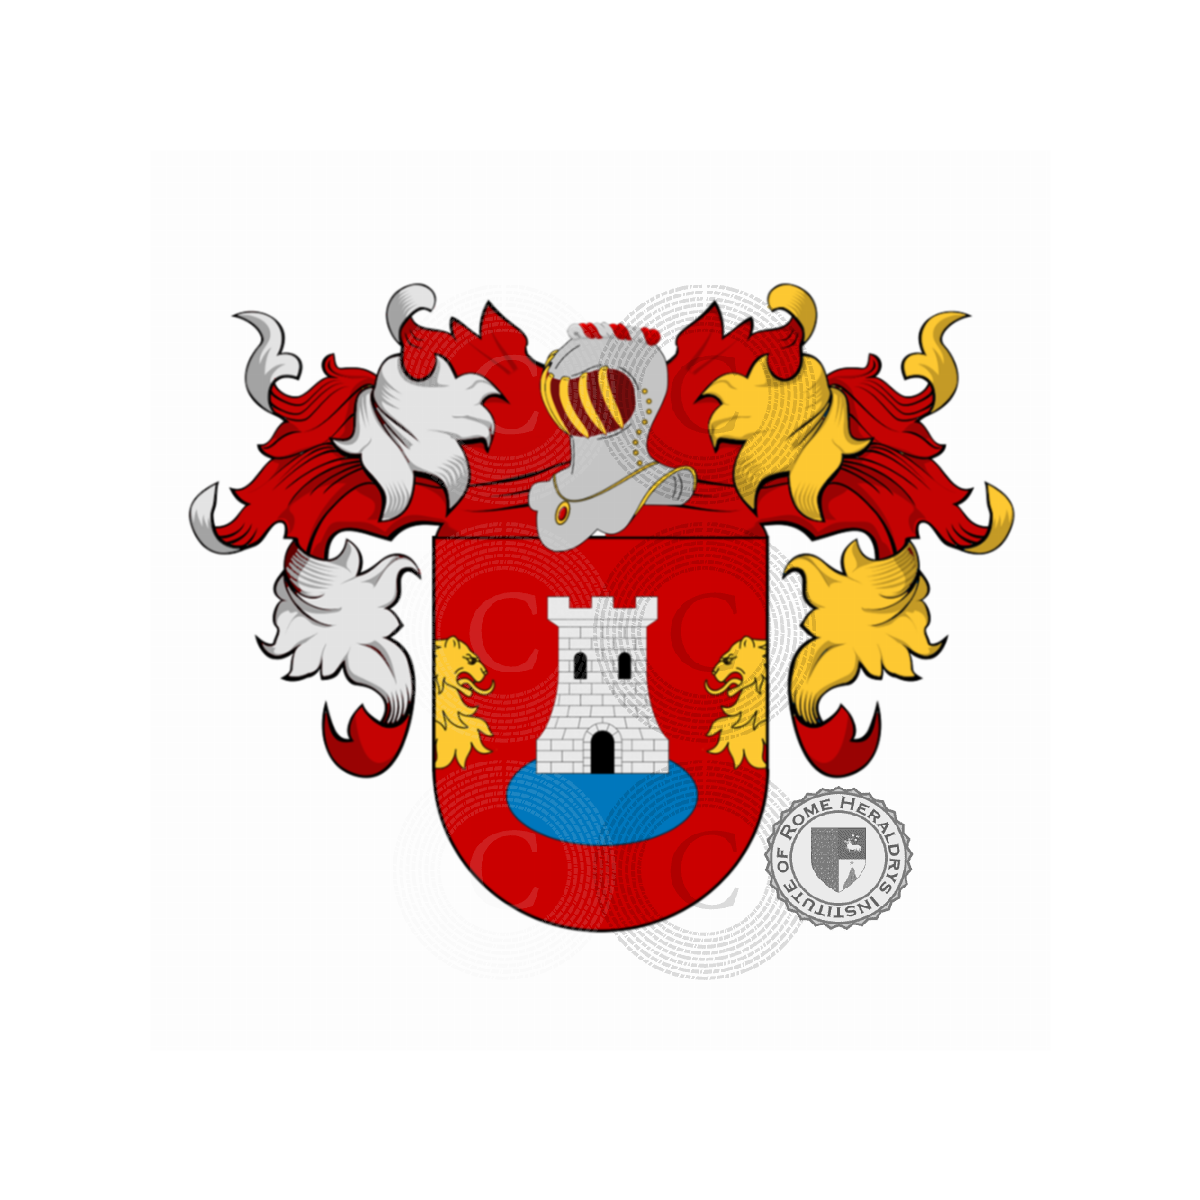 Coat of arms of familyTorre